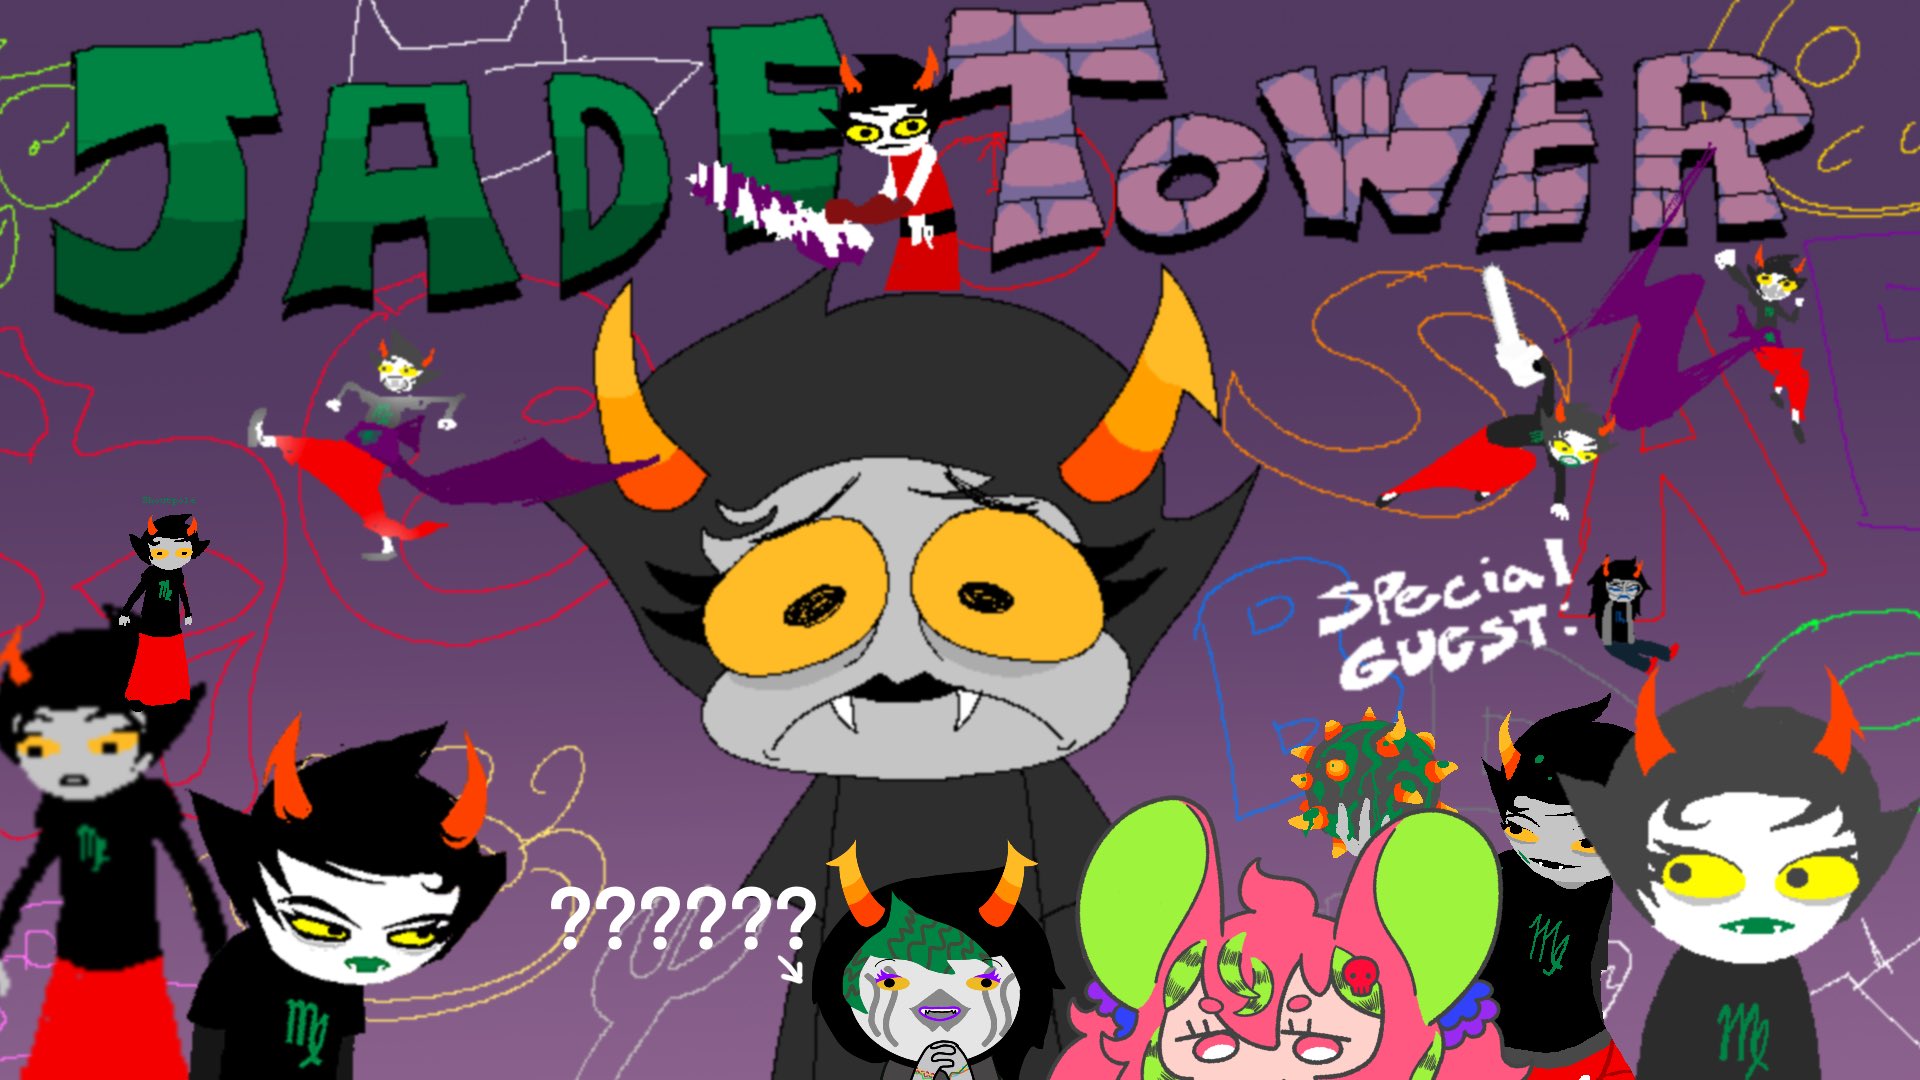 I AM NOT HOMESTUCK FAN. — Hight of Pizza Tower Characters